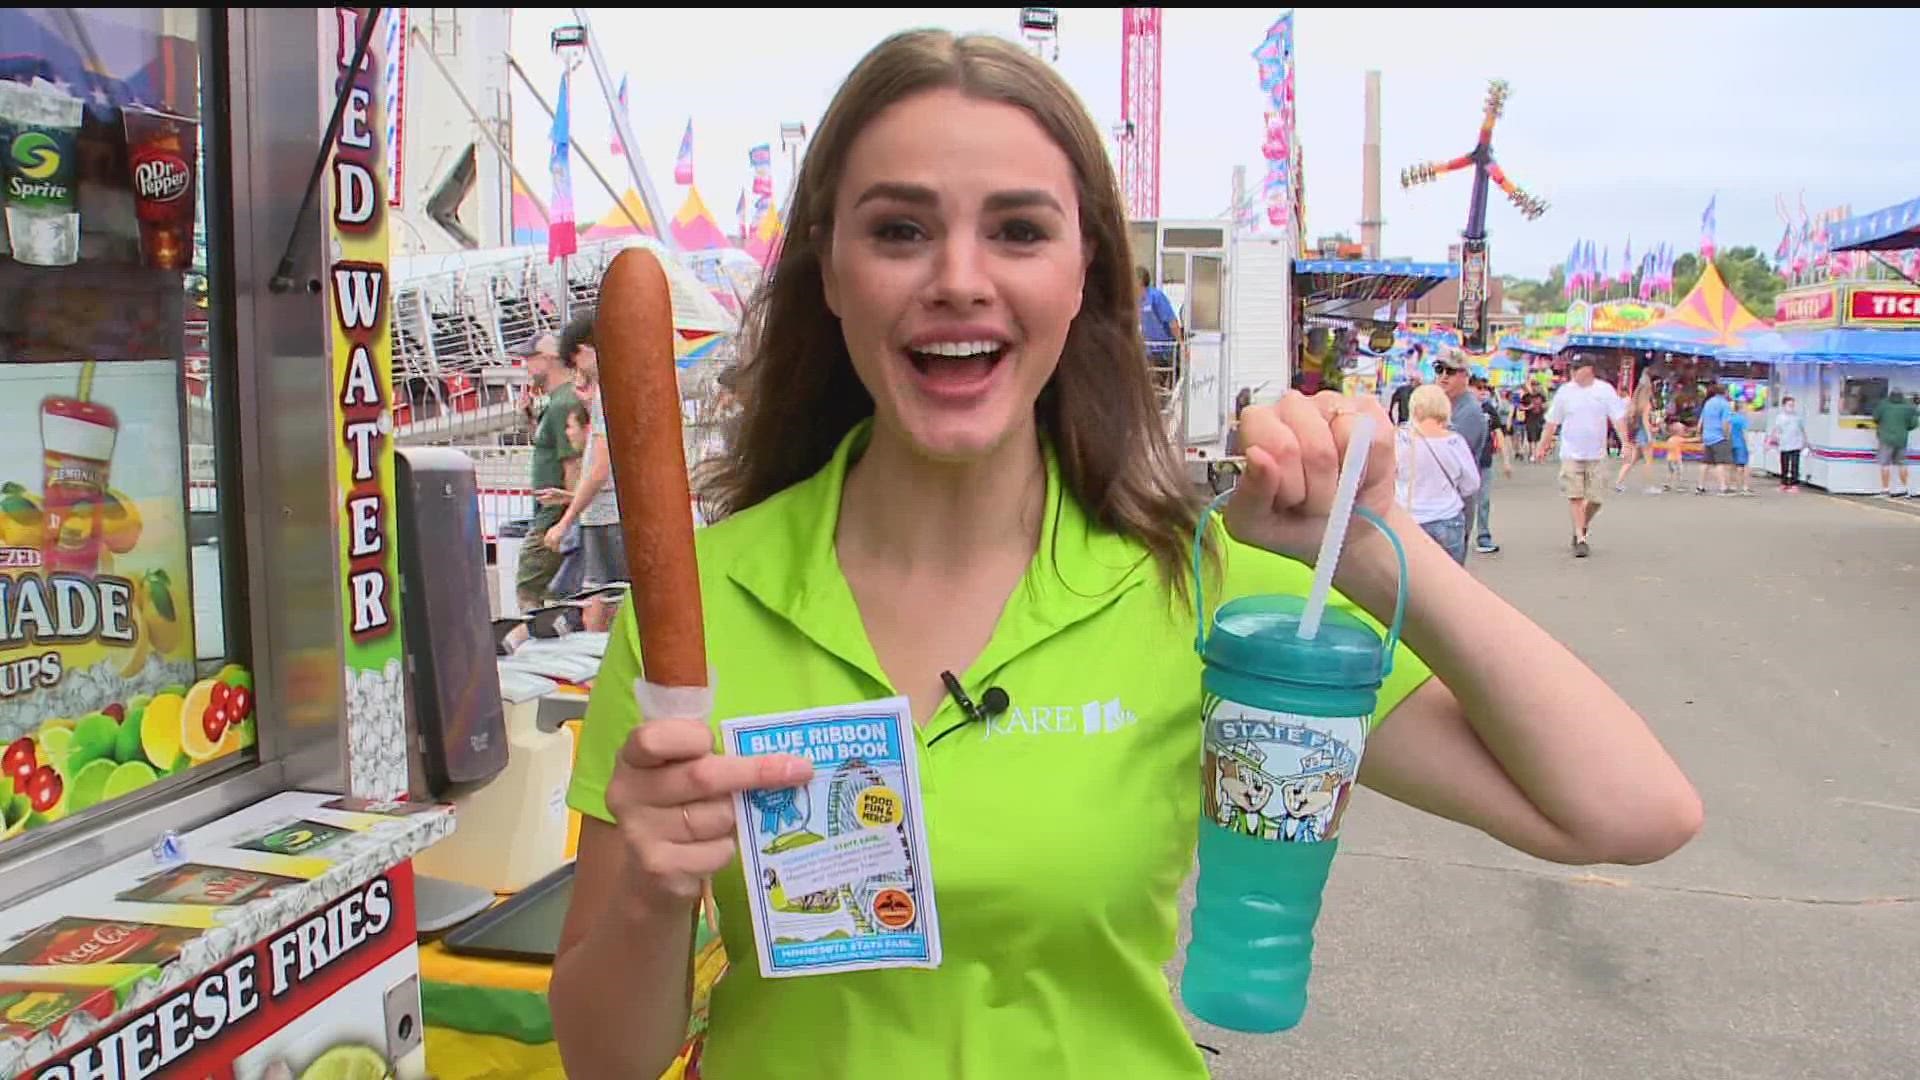 Alicia and Jenn's State Fair haul on a budget.